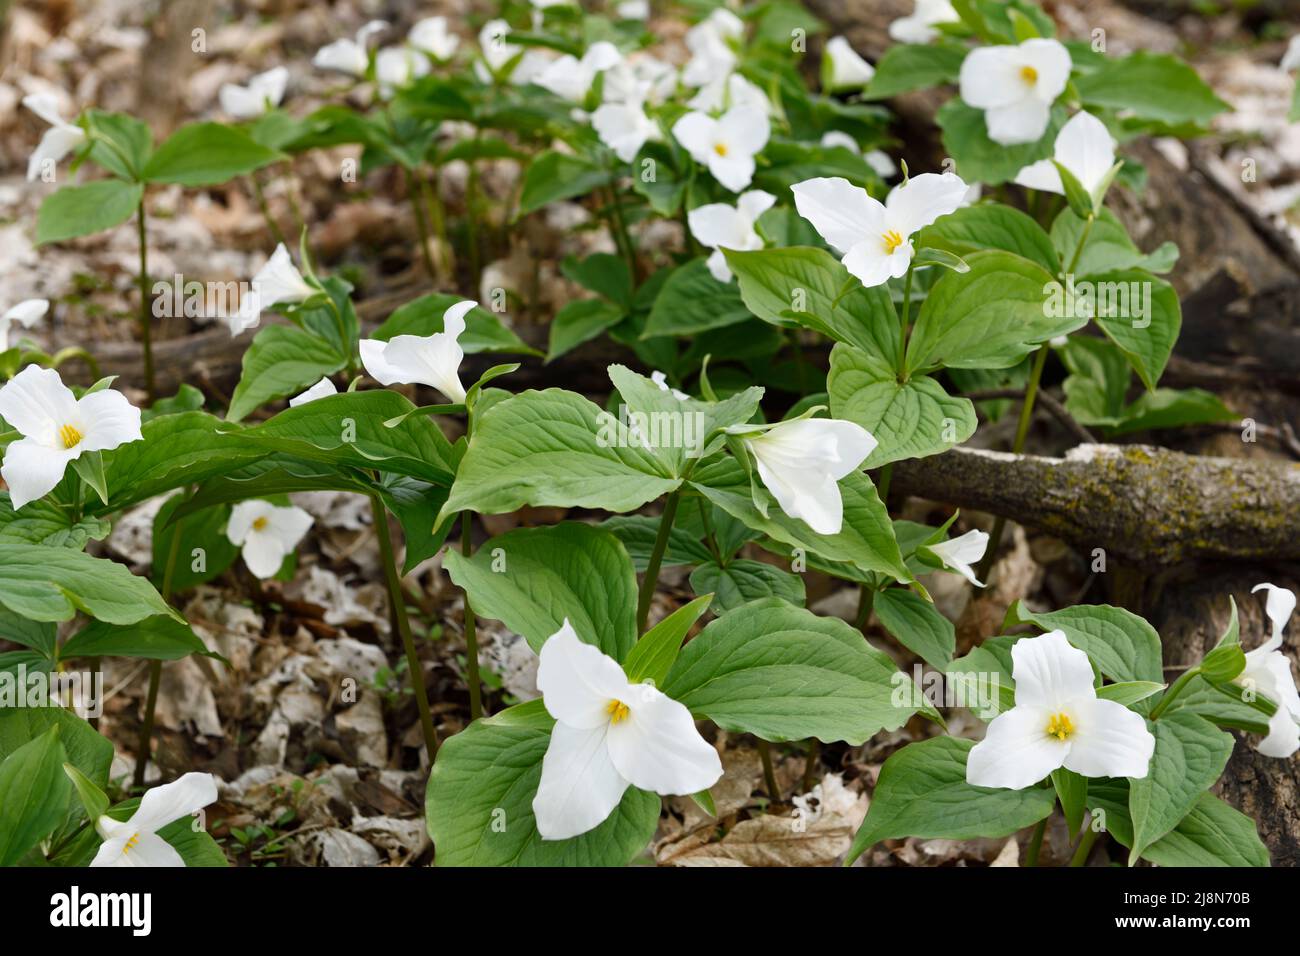 Carpet of Wild Great White Trillium Spring flowers ground cover Trillium grandiflorum on the forest floor with dead leaves Stock Photo